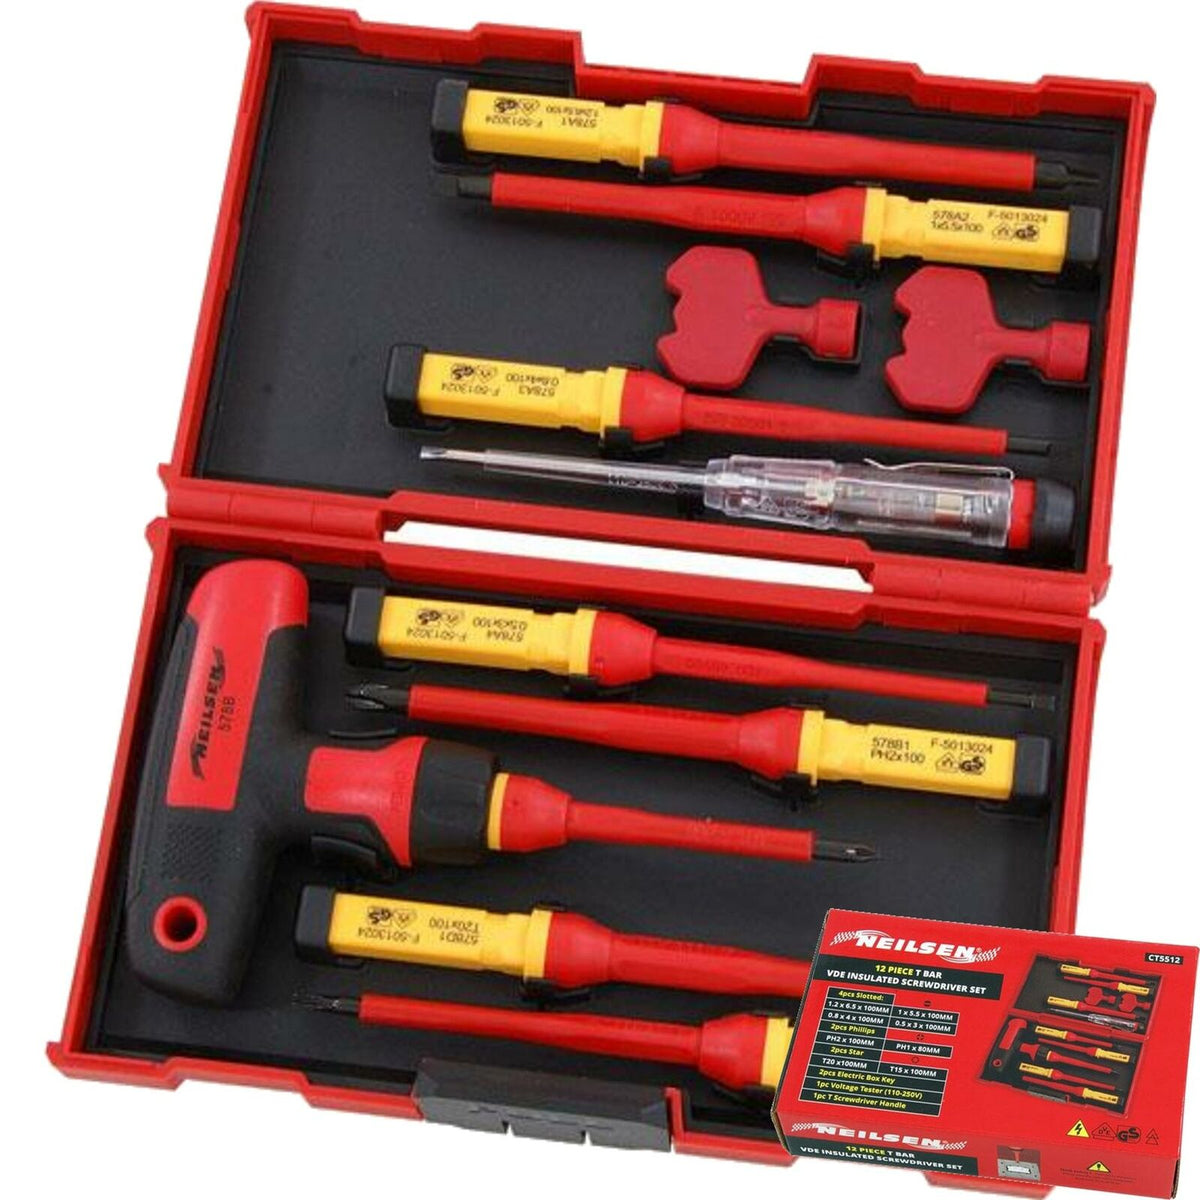 Neilsen 12pc Vde Insulated T Bar Pozi Flat Slotted Magnetic Tip Screwdriver Set